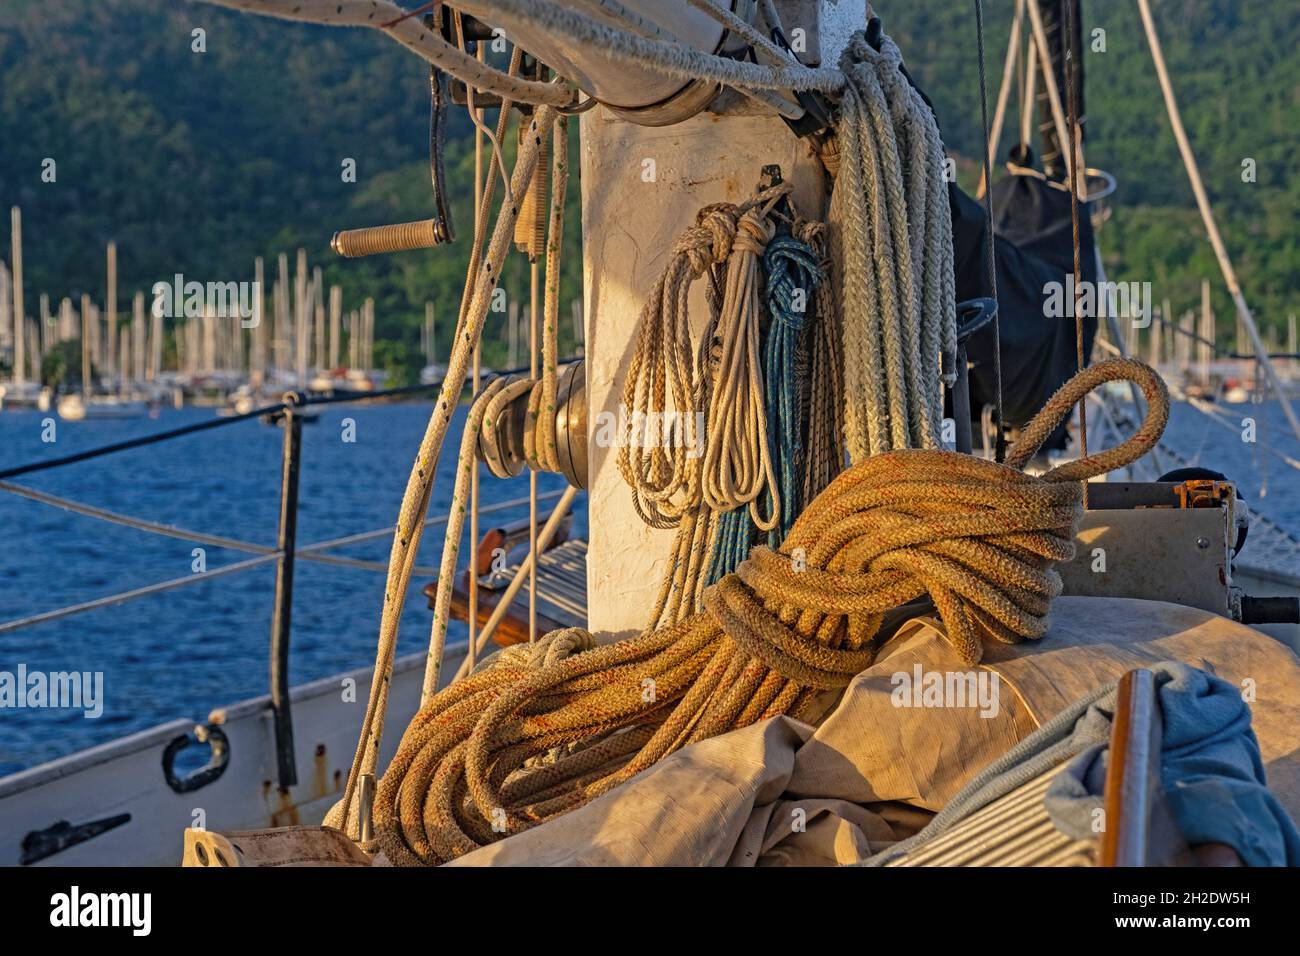 Coiled ropes on board of sailing boat / yacht in the harbour of Chaguaramas near Port of Spain, Trinidad and Tobago in the Caribbean Stock Photo